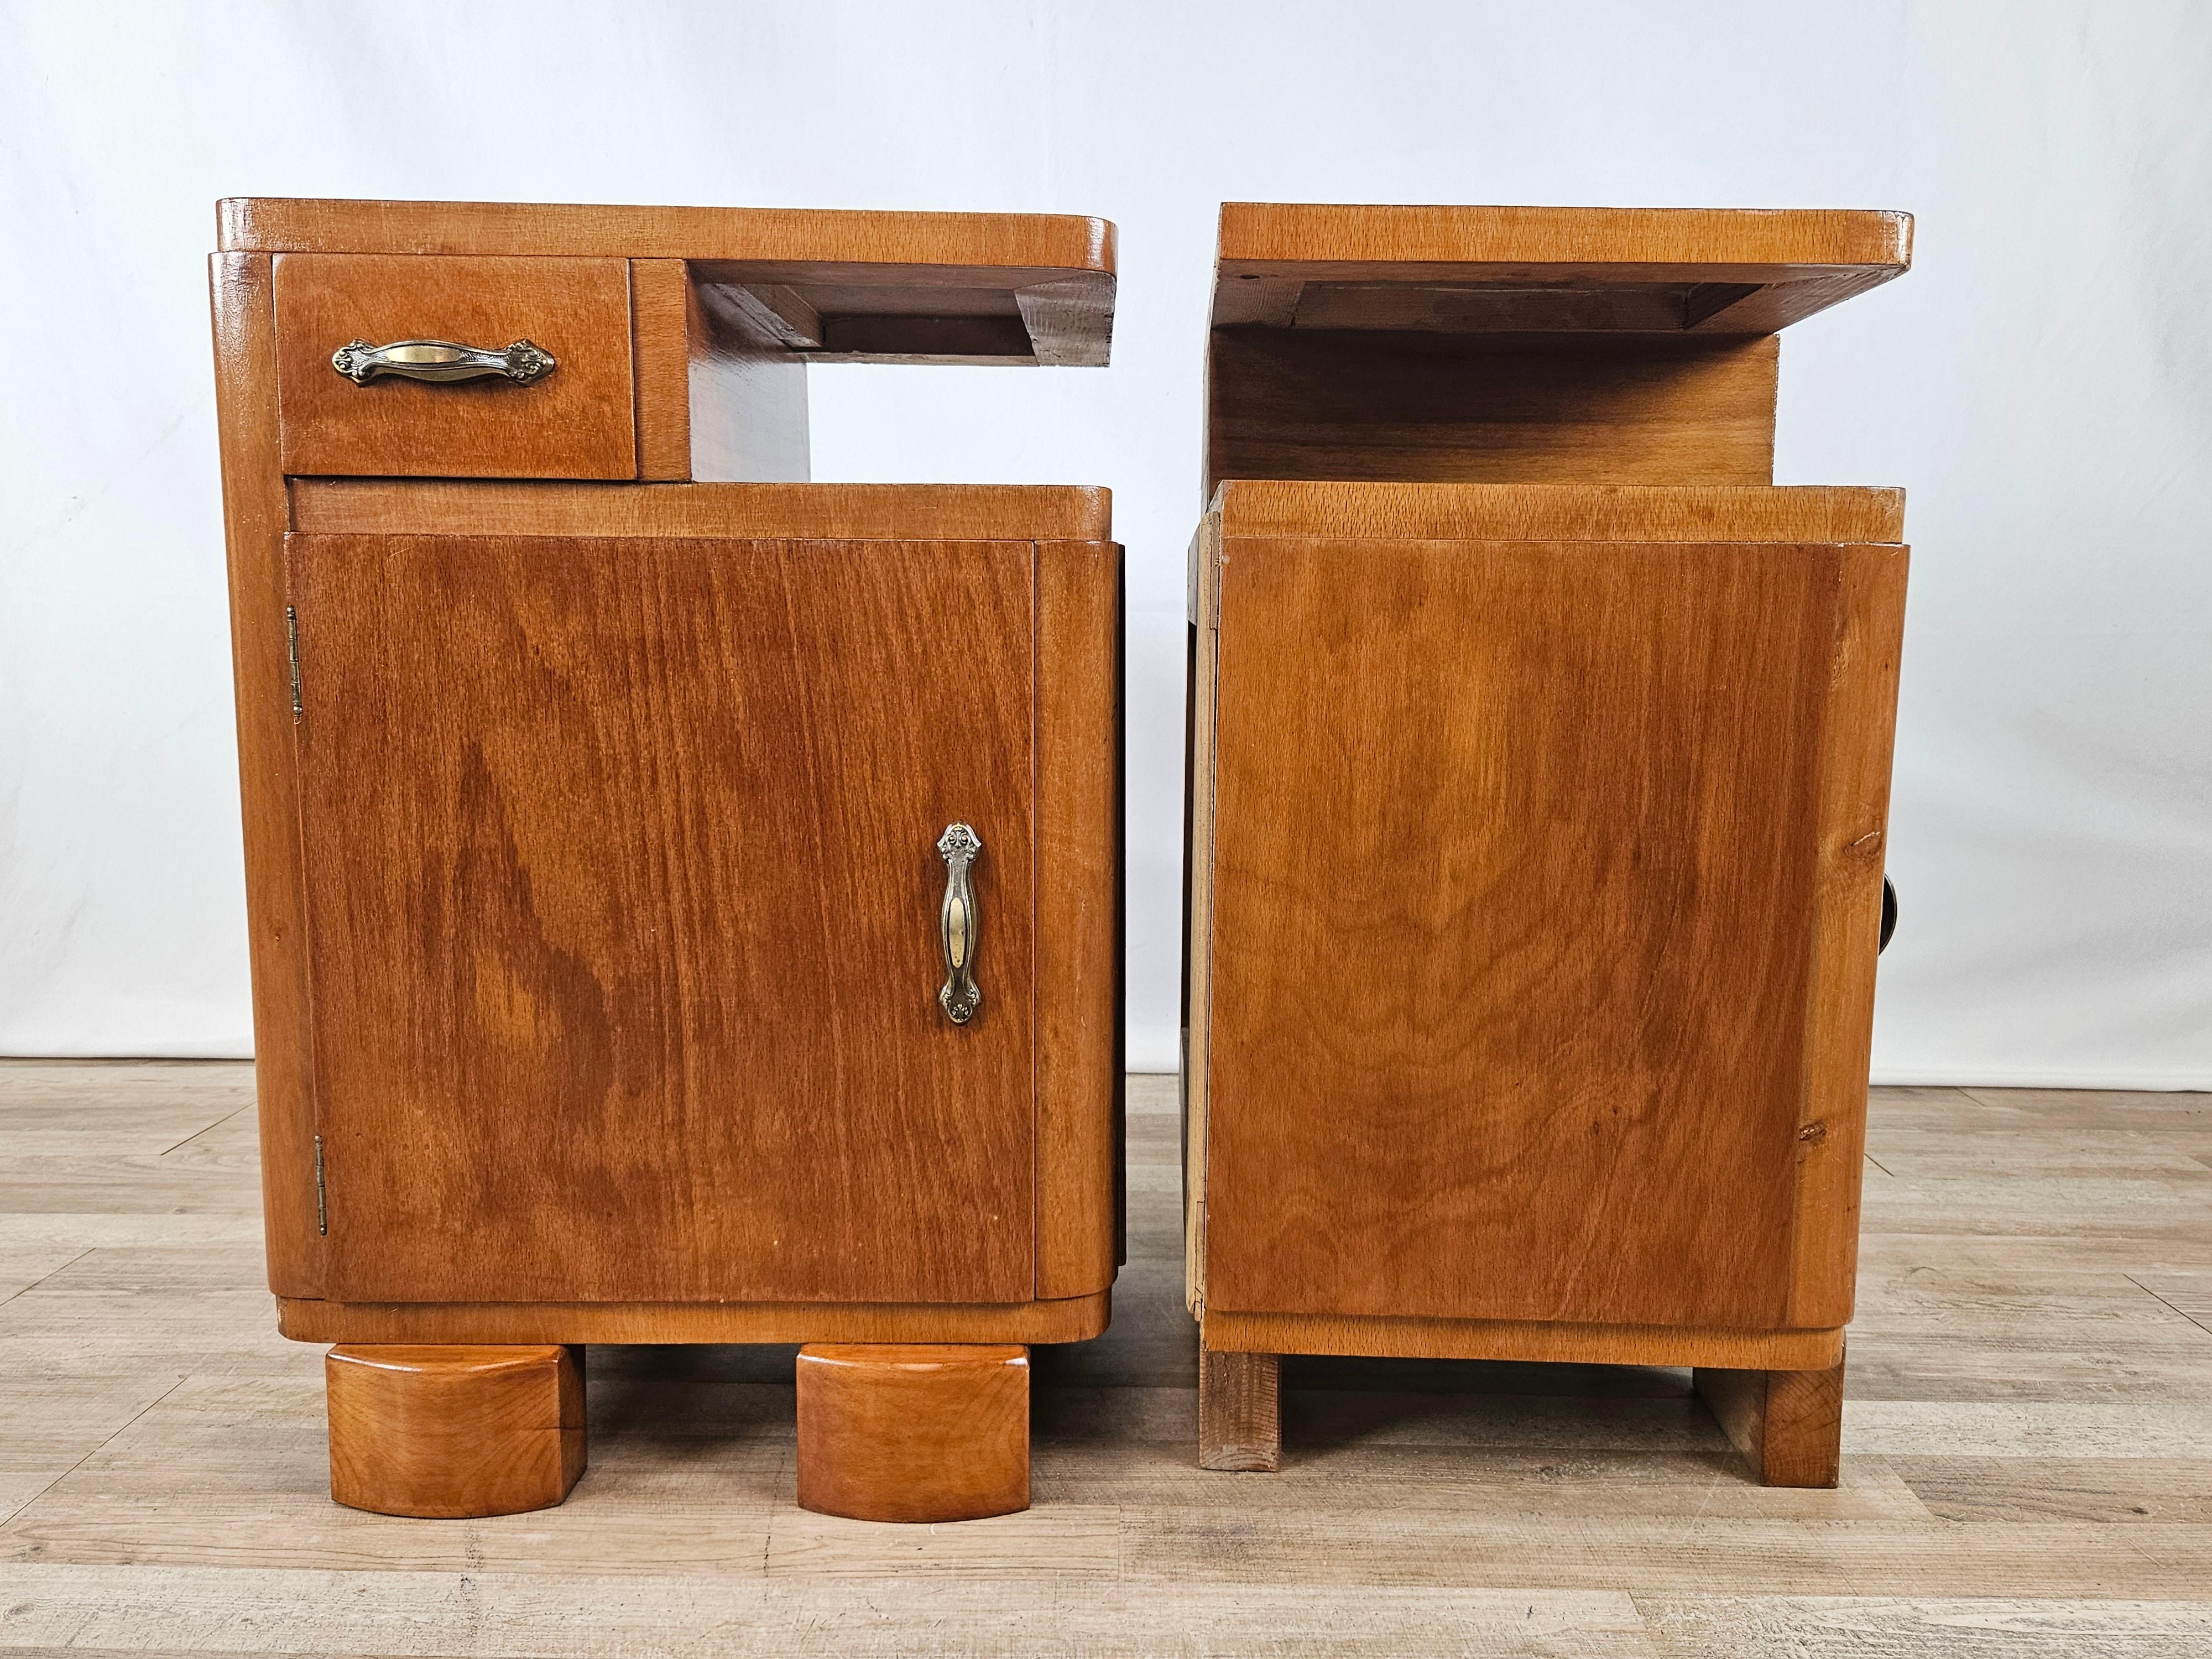 Pair of bedroom nightstands made circa 1940 entirely of wood with door and drawer.

They lend themselves well to all kinds of environments due to their small size and soft, gentle wood tone.

Brass handles placed after the furniture was